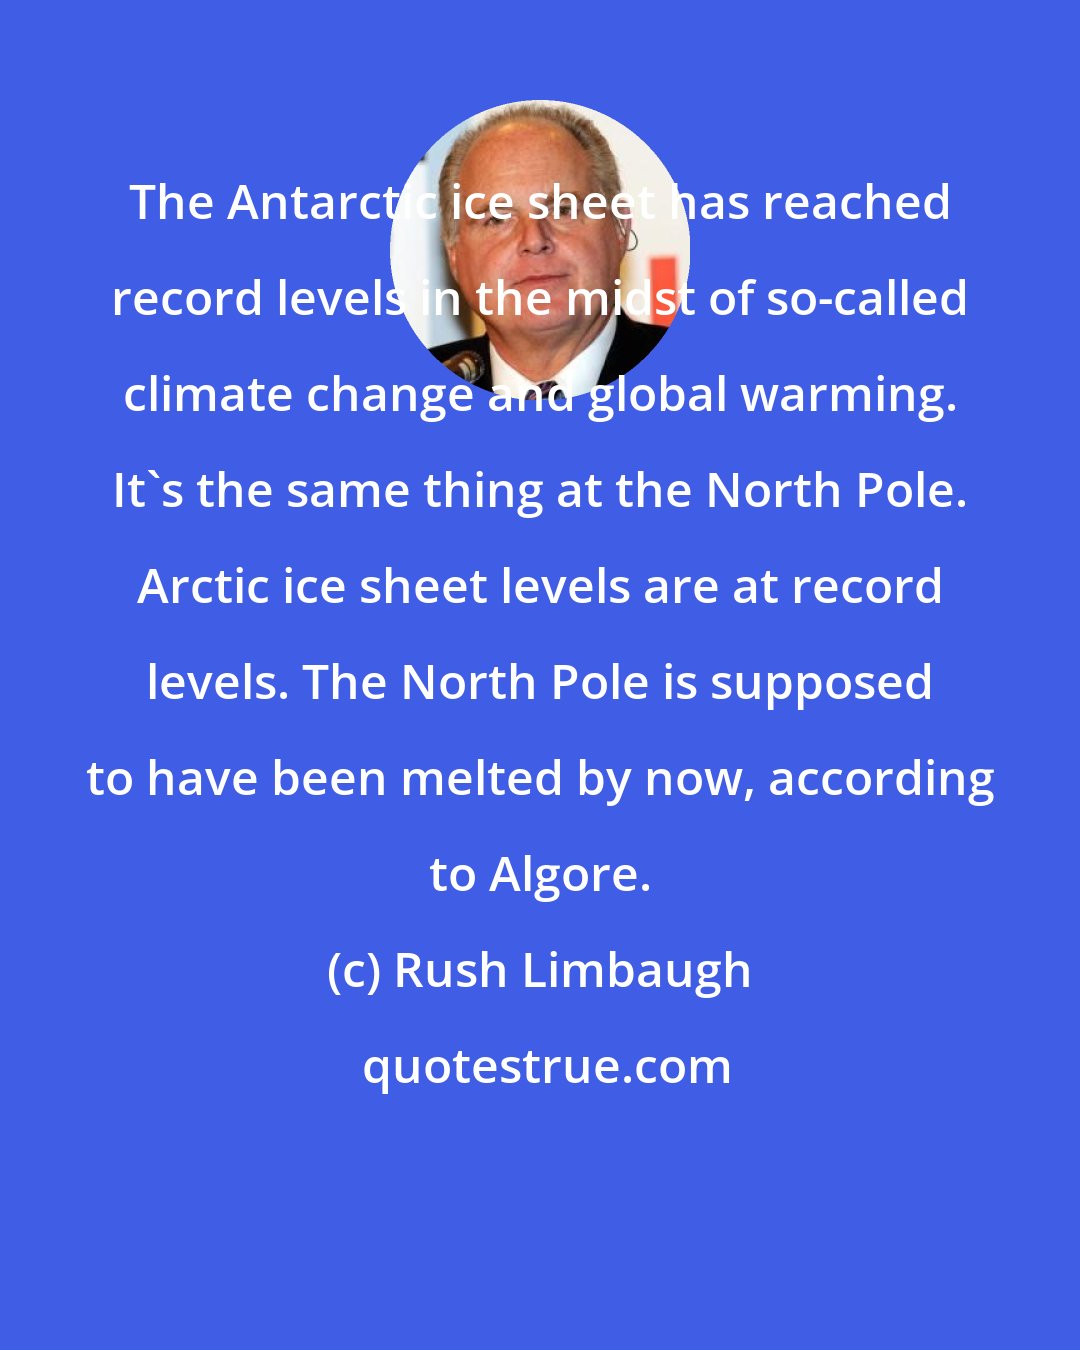 Rush Limbaugh: The Antarctic ice sheet has reached record levels in the midst of so-called climate change and global warming. It's the same thing at the North Pole. Arctic ice sheet levels are at record levels. The North Pole is supposed to have been melted by now, according to Algore.